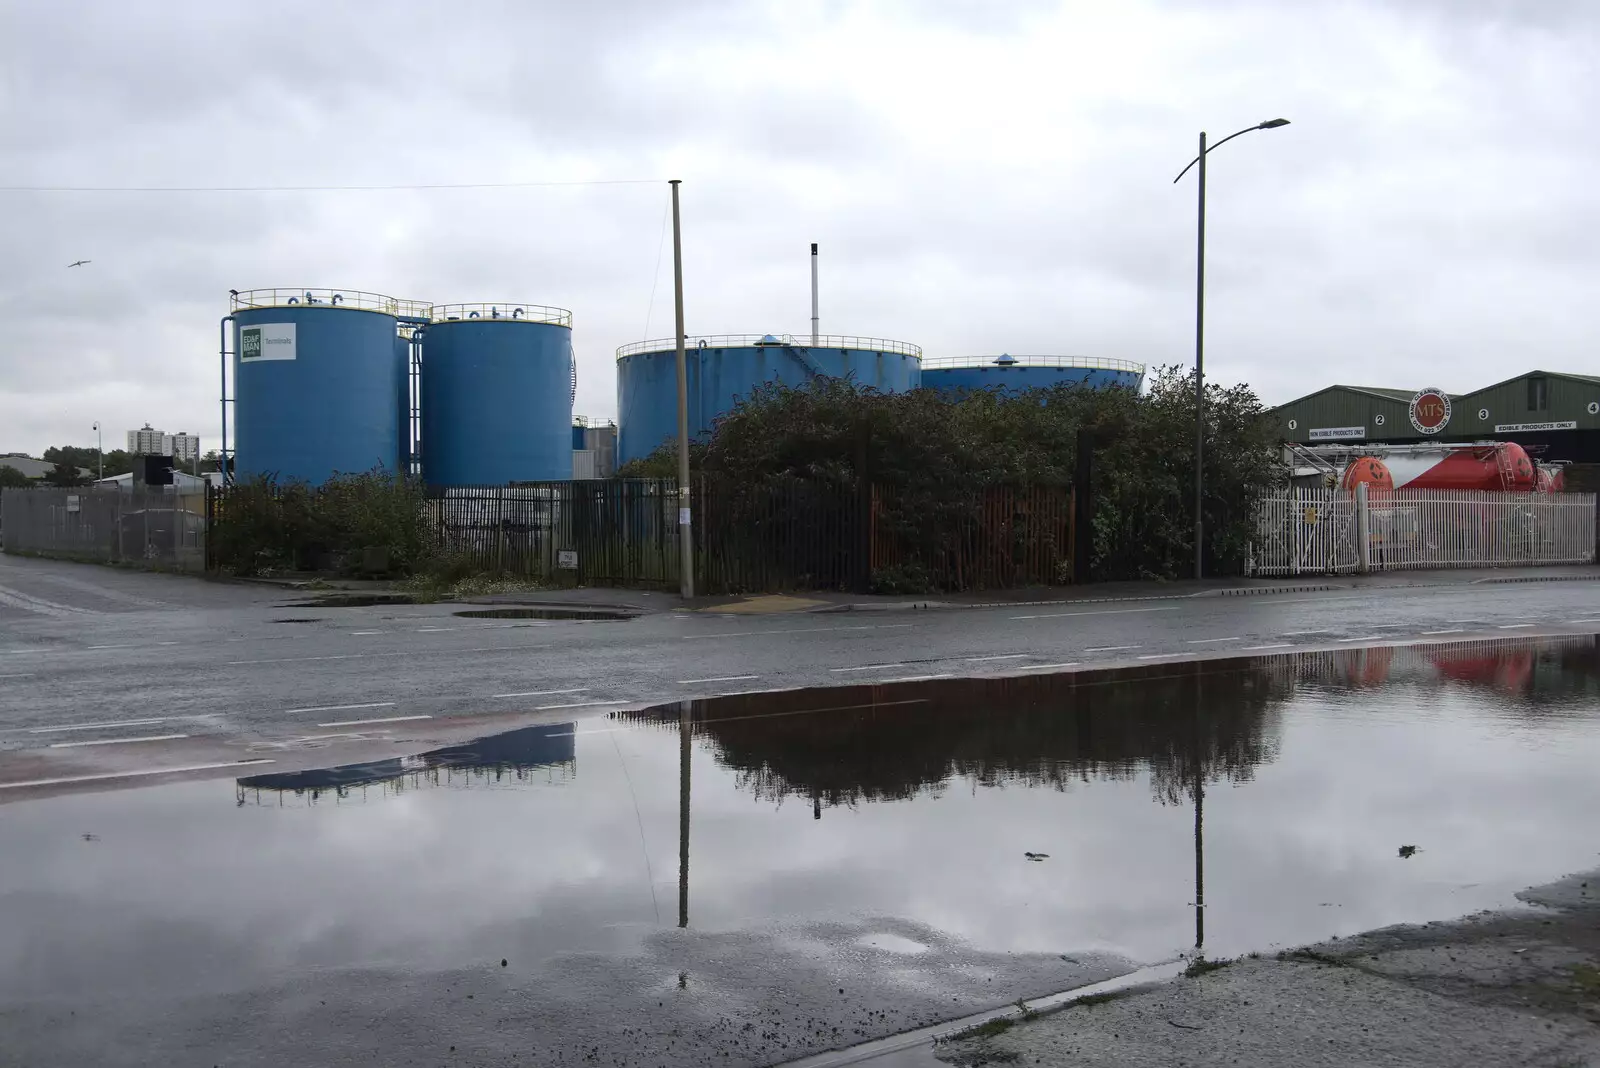 Standing water and tanks, from Pork Pies and Dockside Dereliction, Melton Mowbray and Liverpool - 7th August 2021